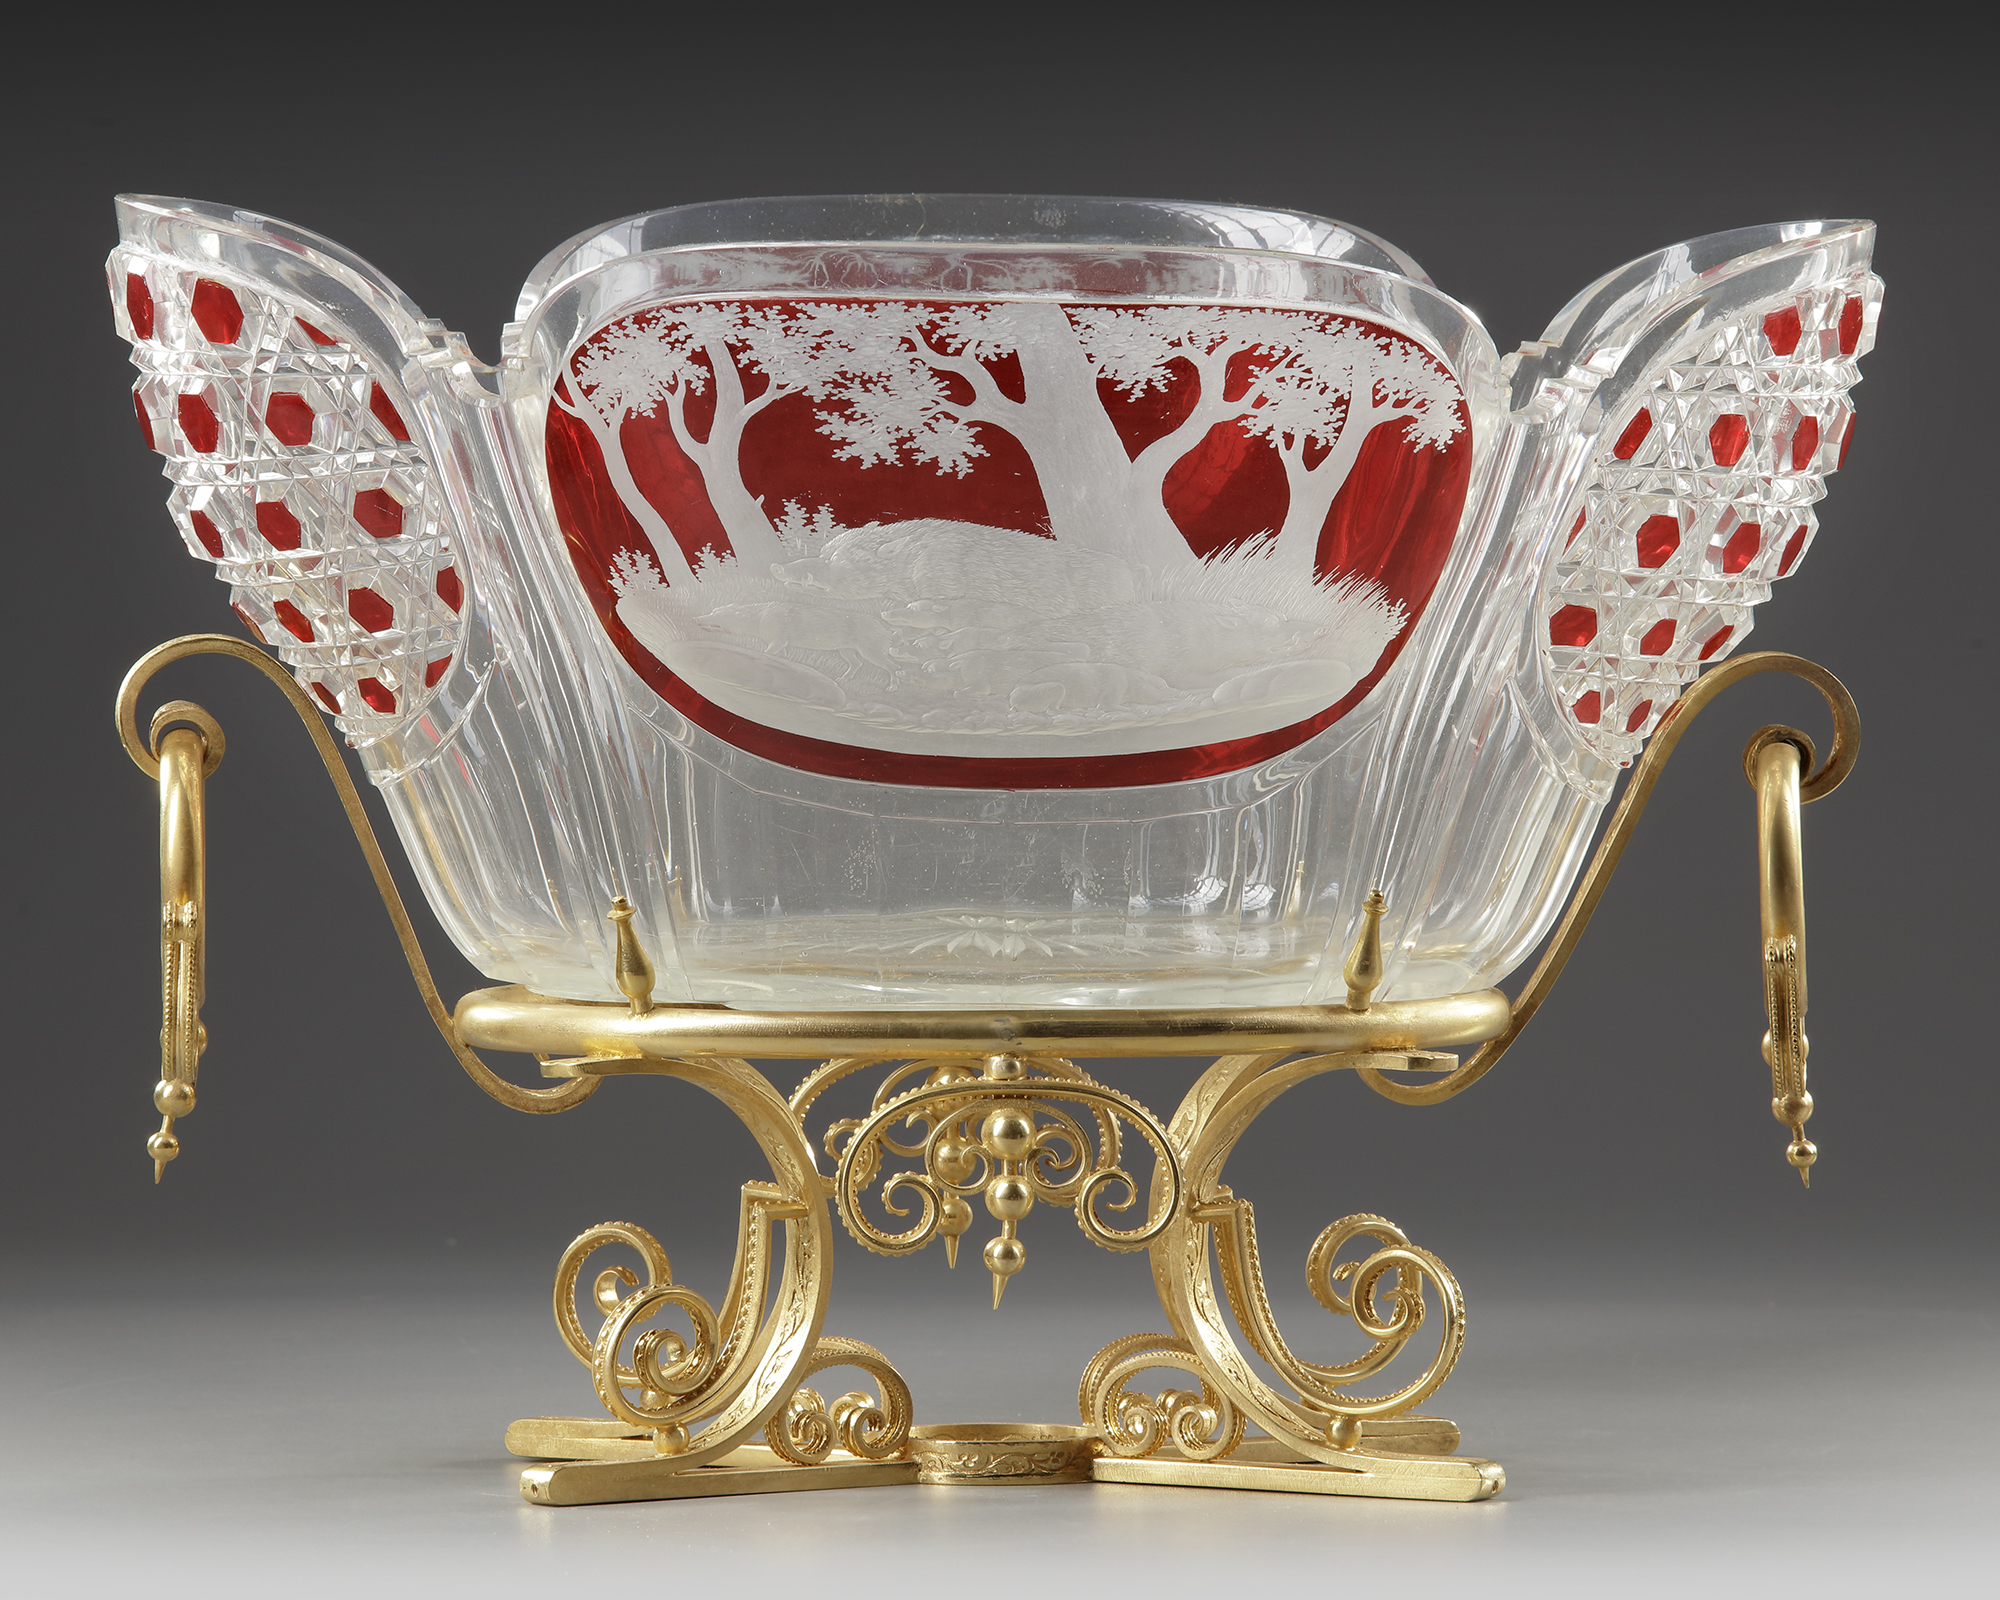 A CRYSTAL CUP, LATE 19TH CENTURY - Image 2 of 5